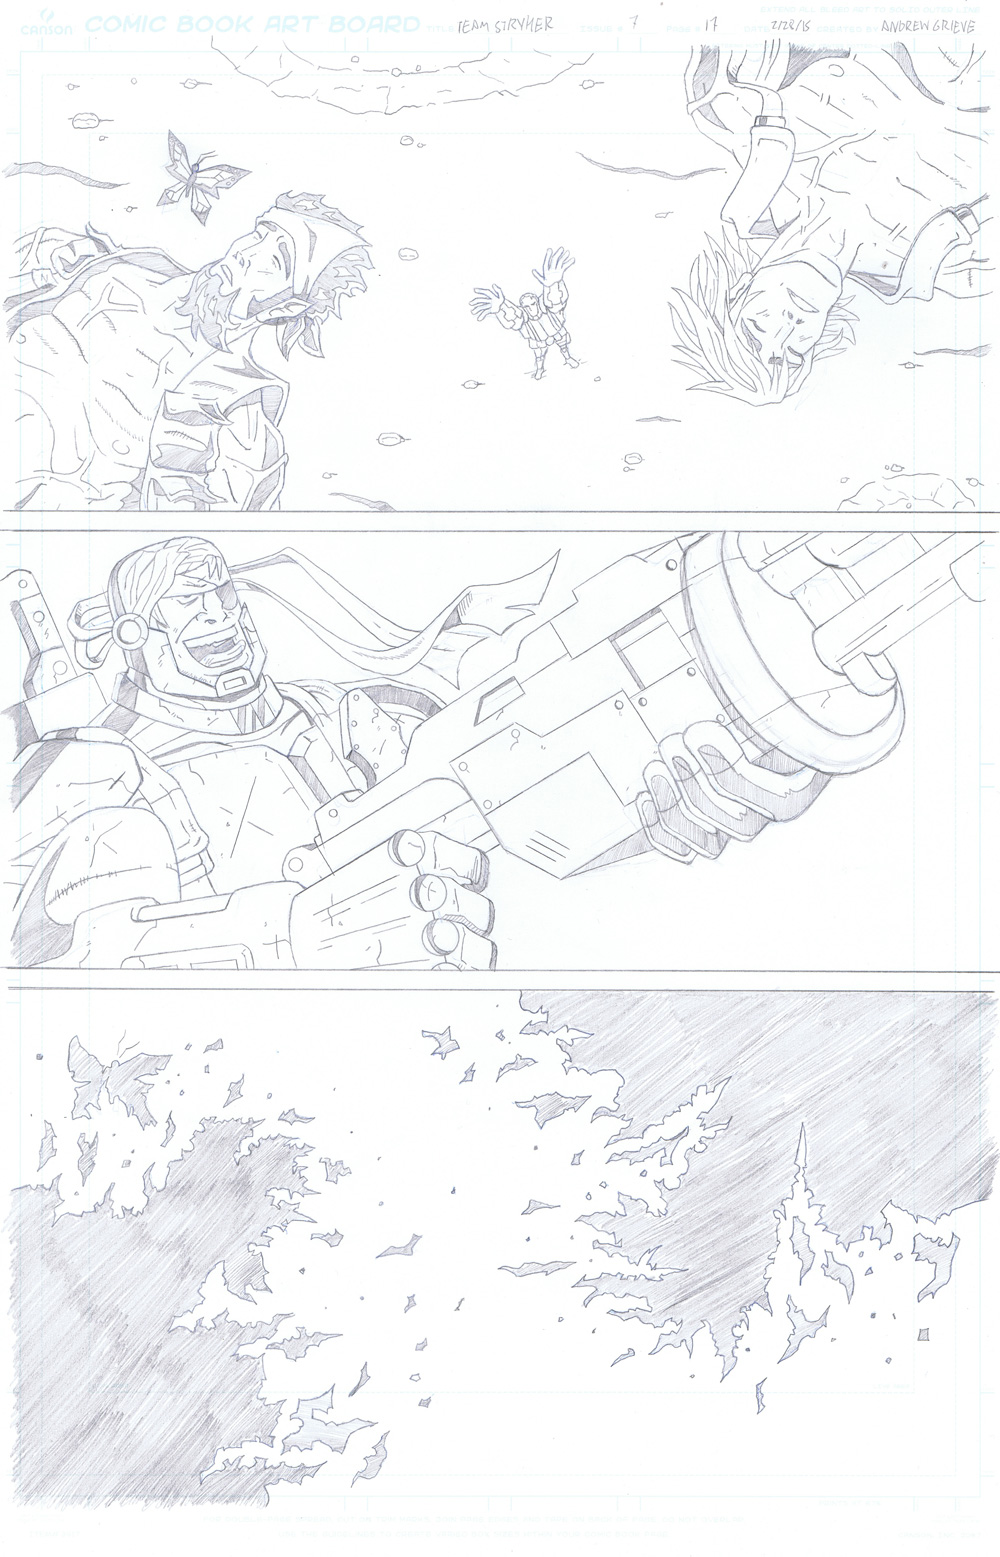 MISSION 007: PAGE 17 PENCIL